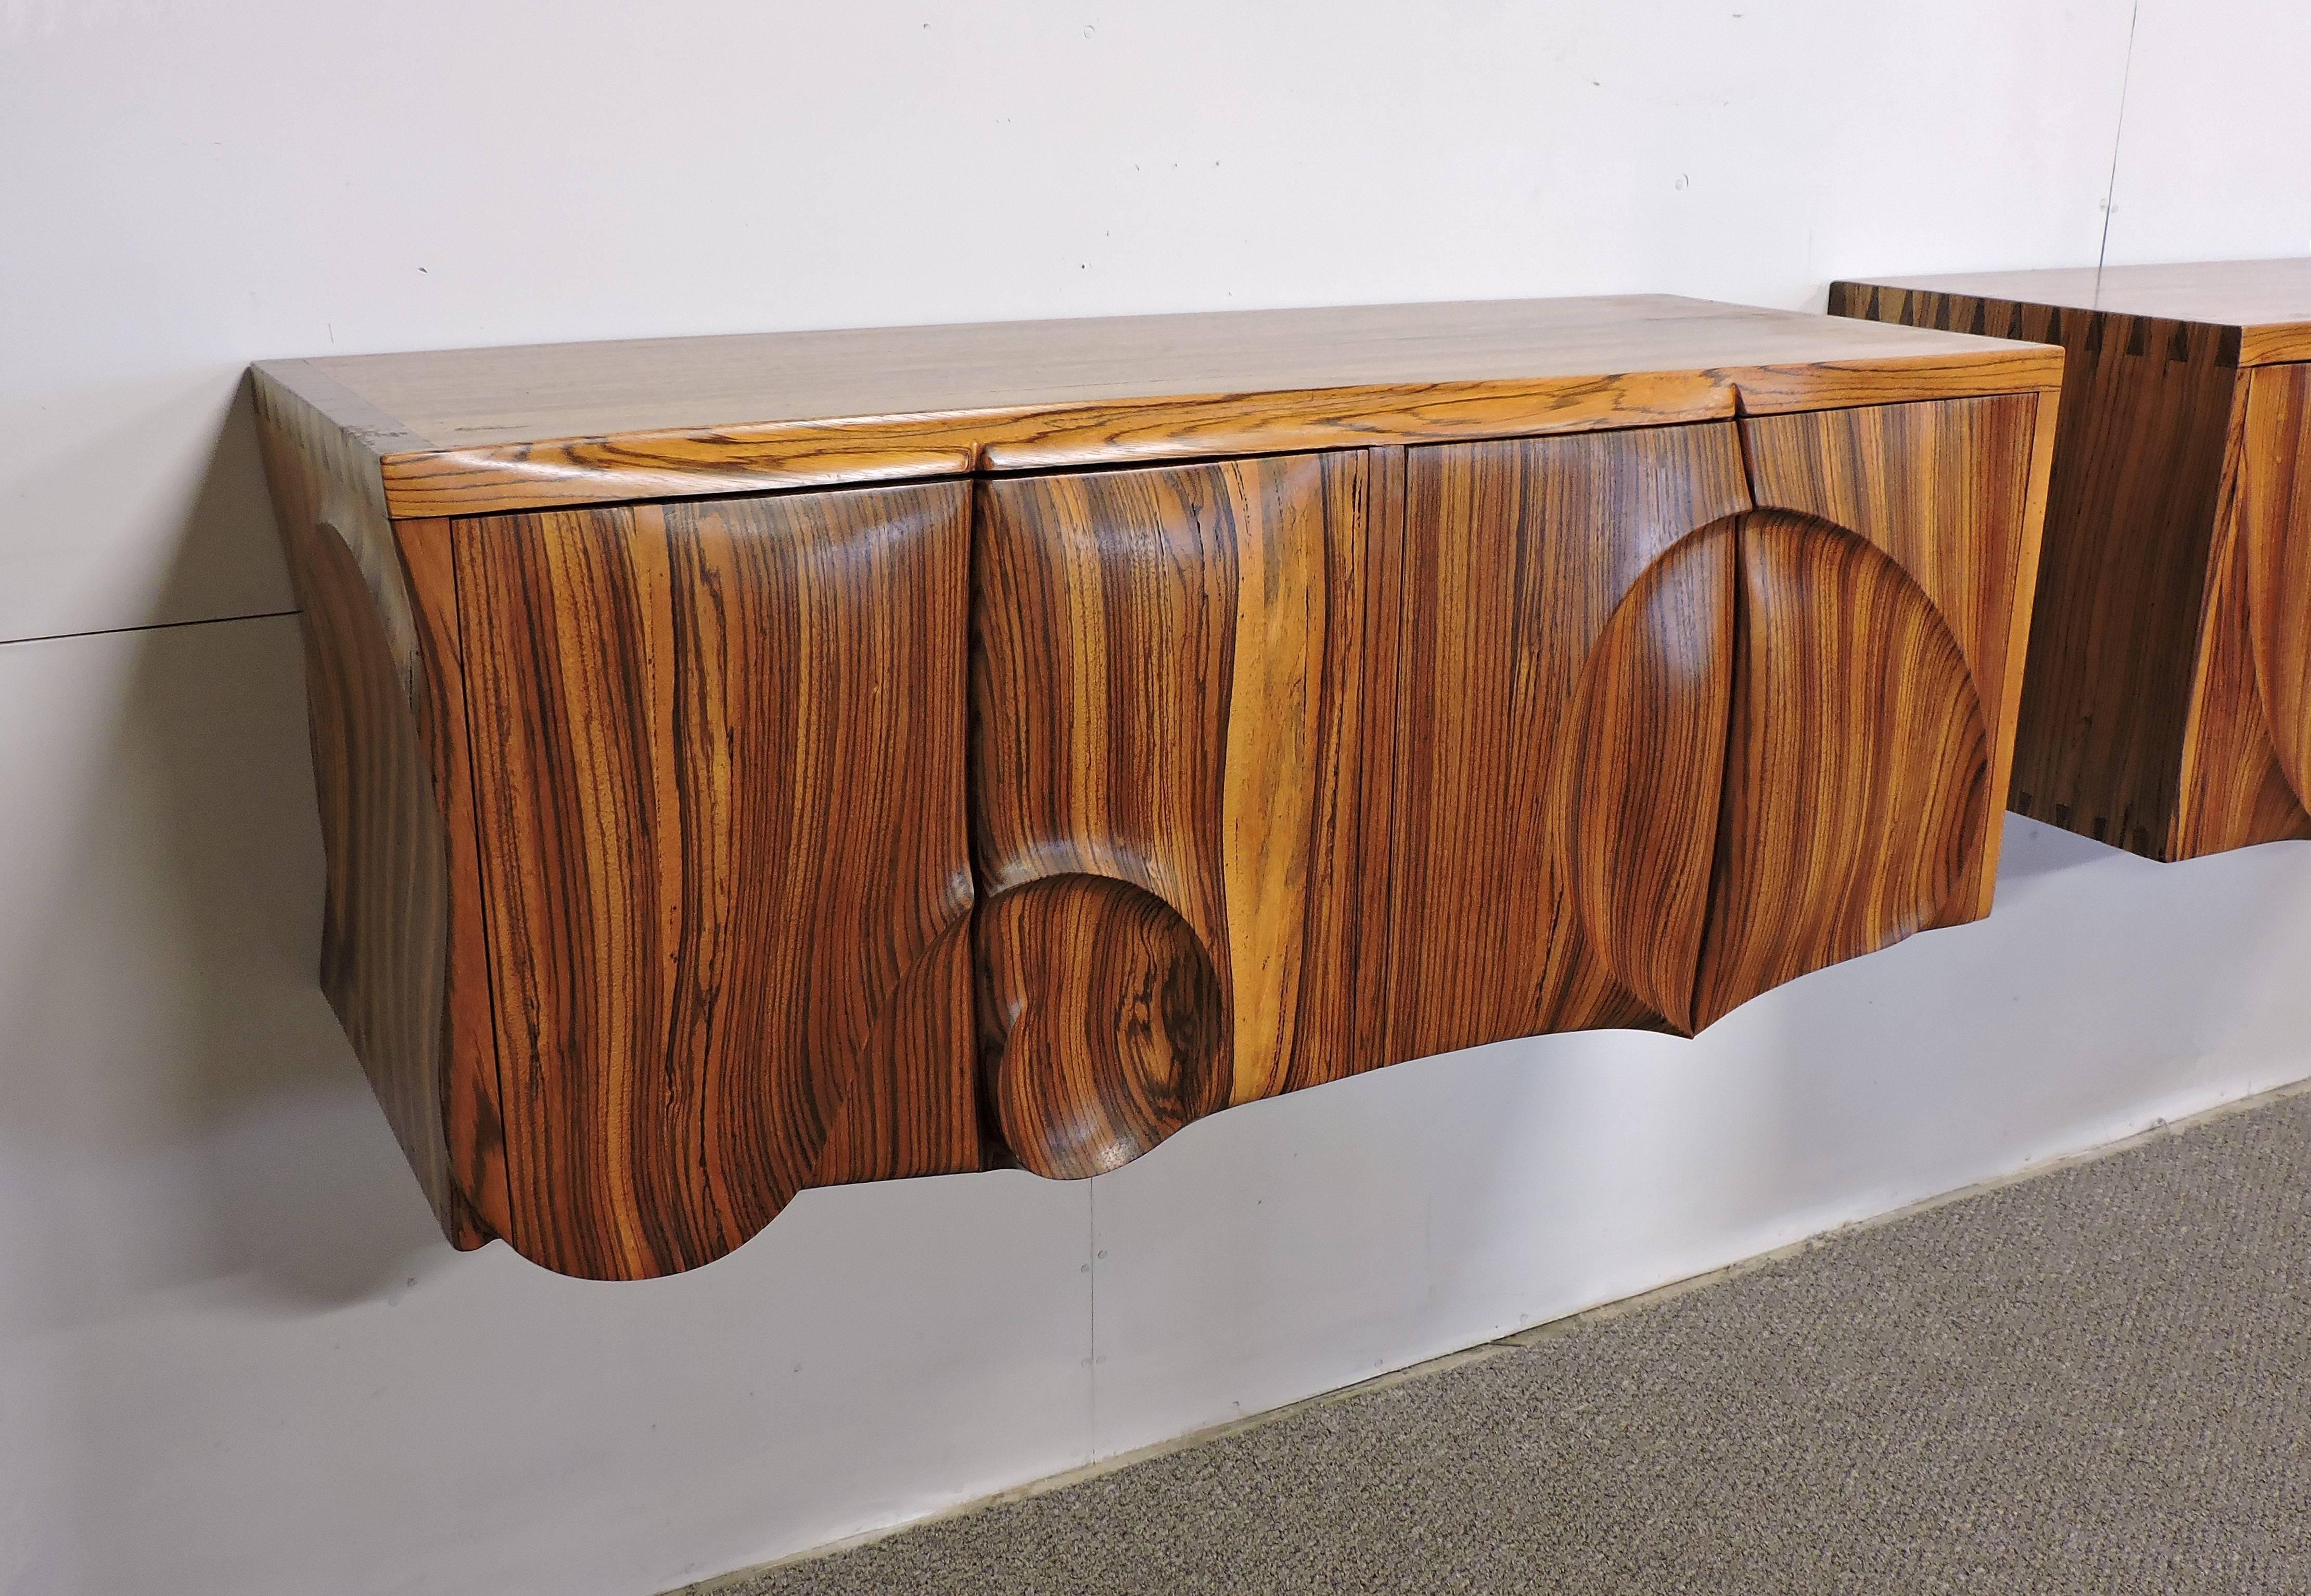 Truly unique and one-of-a-kind hanging cabinets made out of solid exotic zebra wood. These handmade cabinets have a striking look with curvaceous carved panels which nicely compliments the grain of the wood. The cabinet on the left has a pull-out